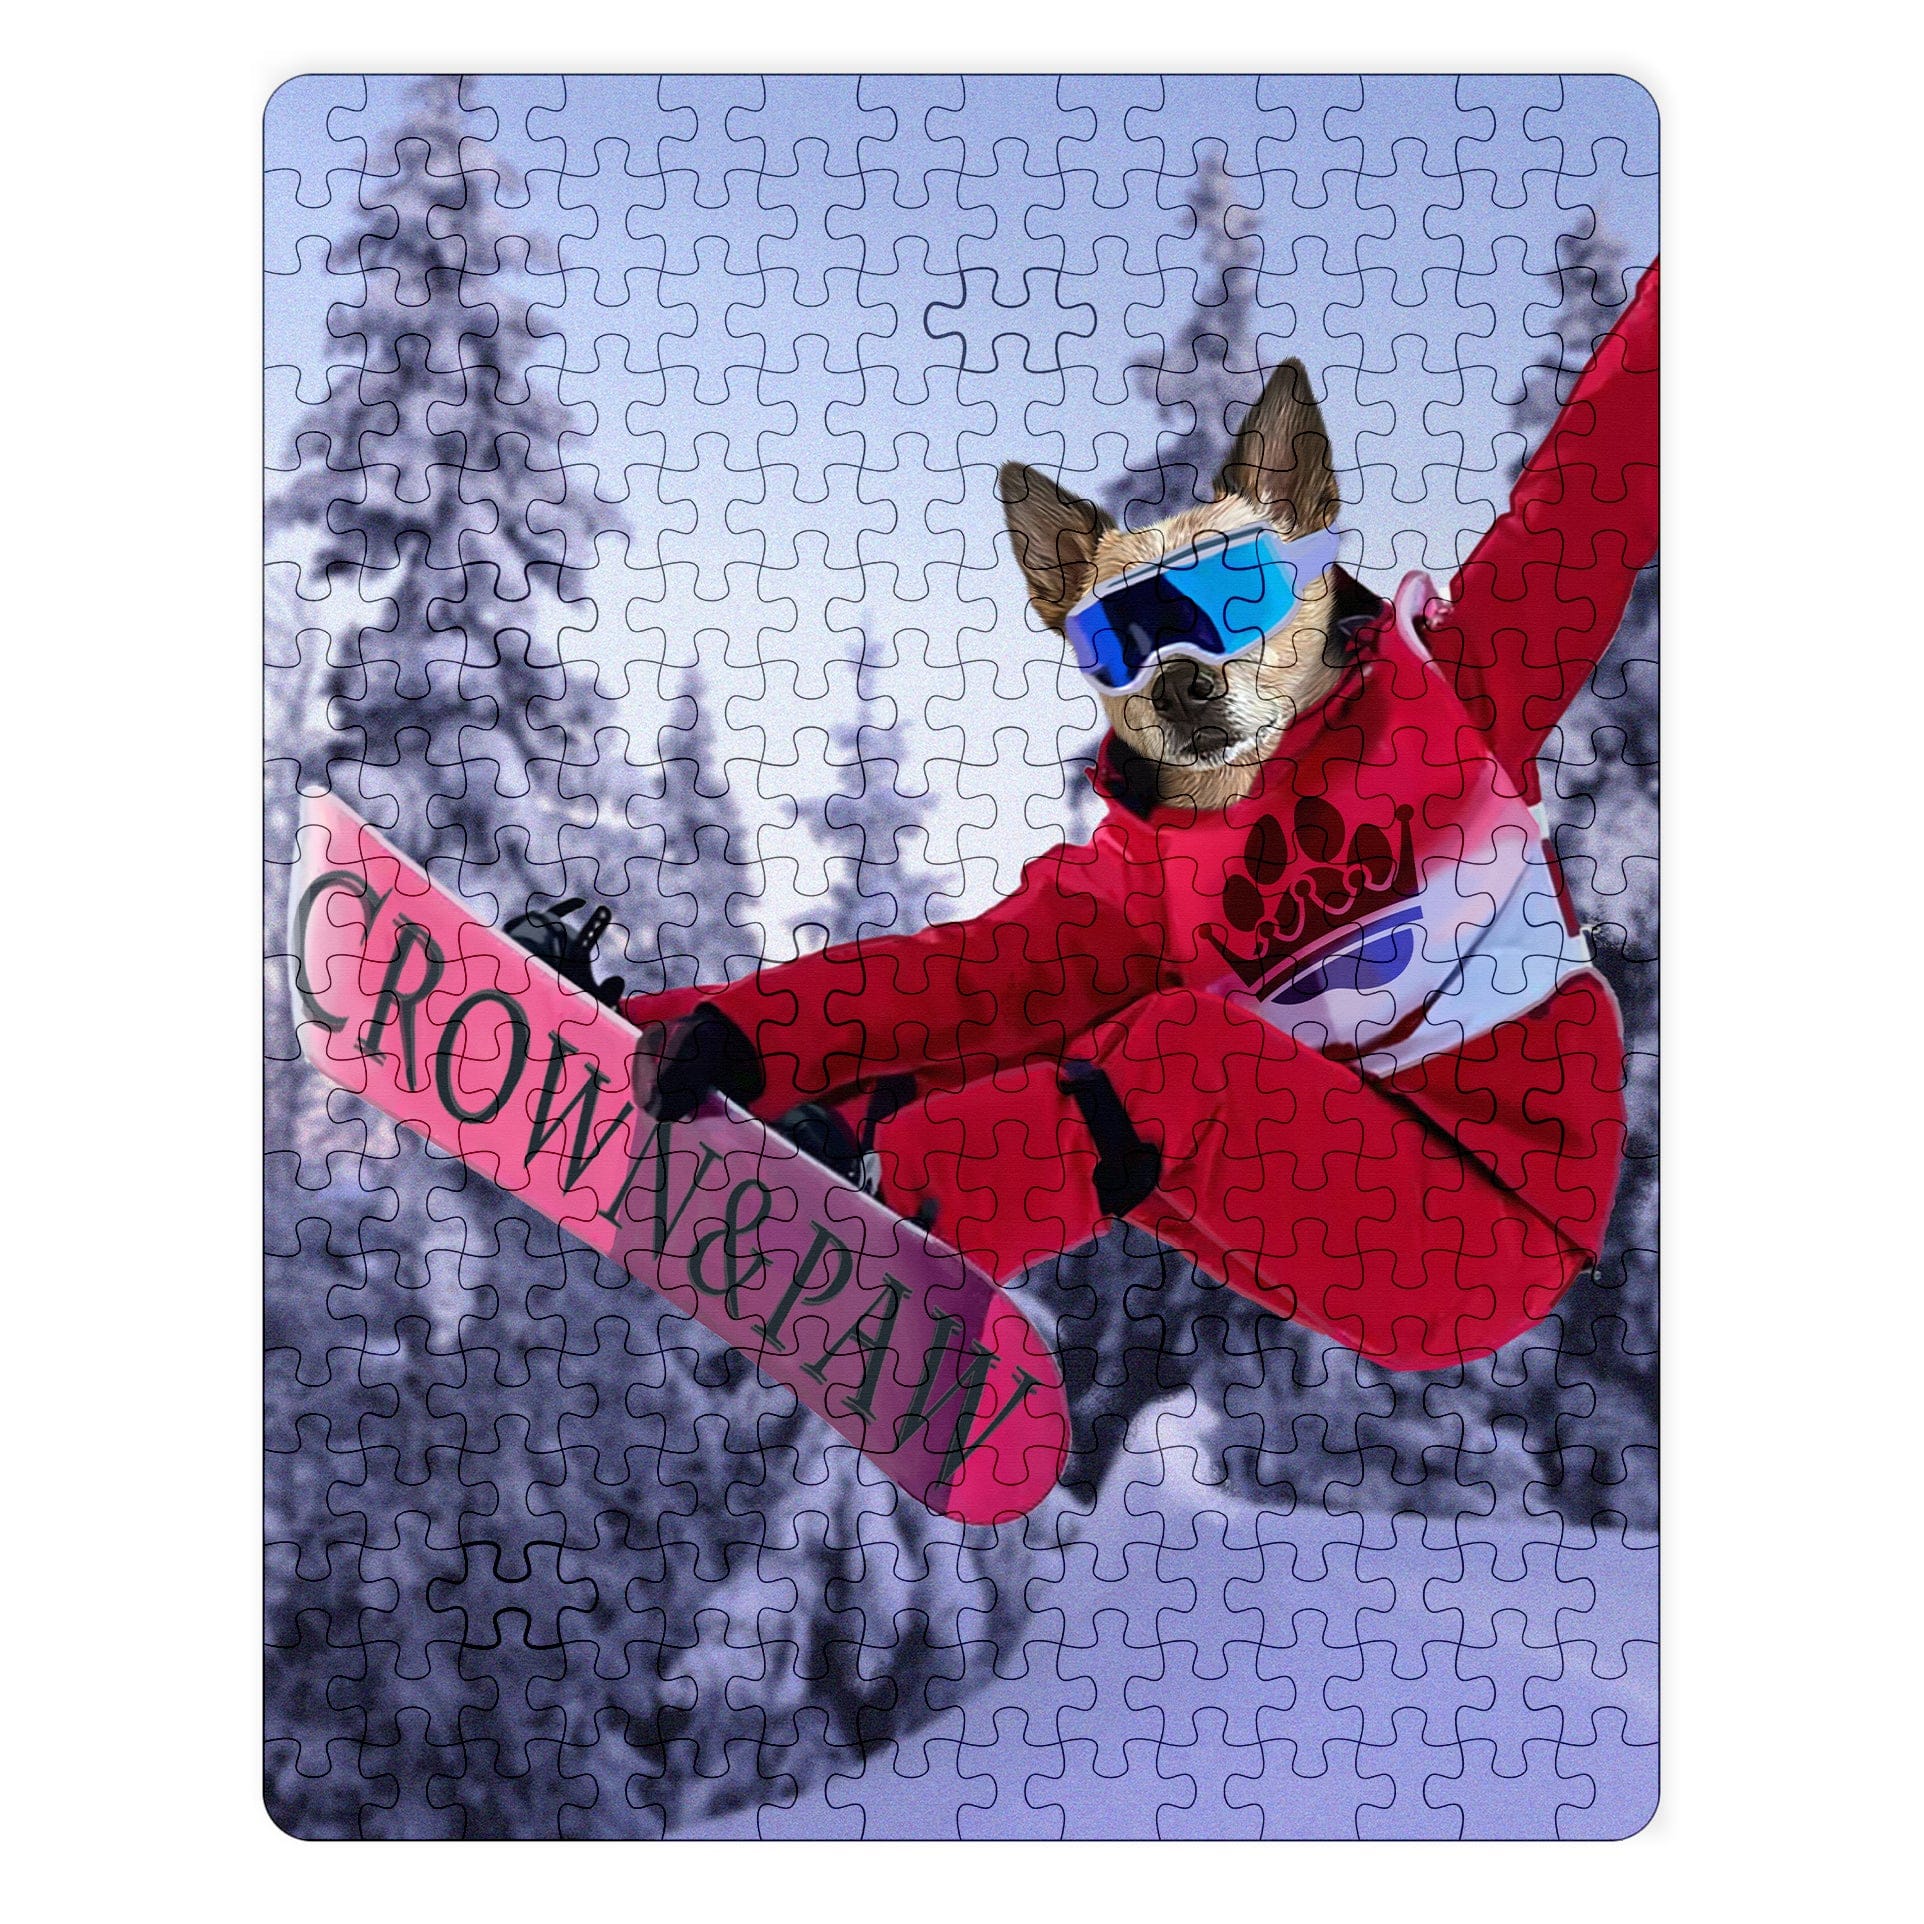 The Snowboarder - Custom Puzzle